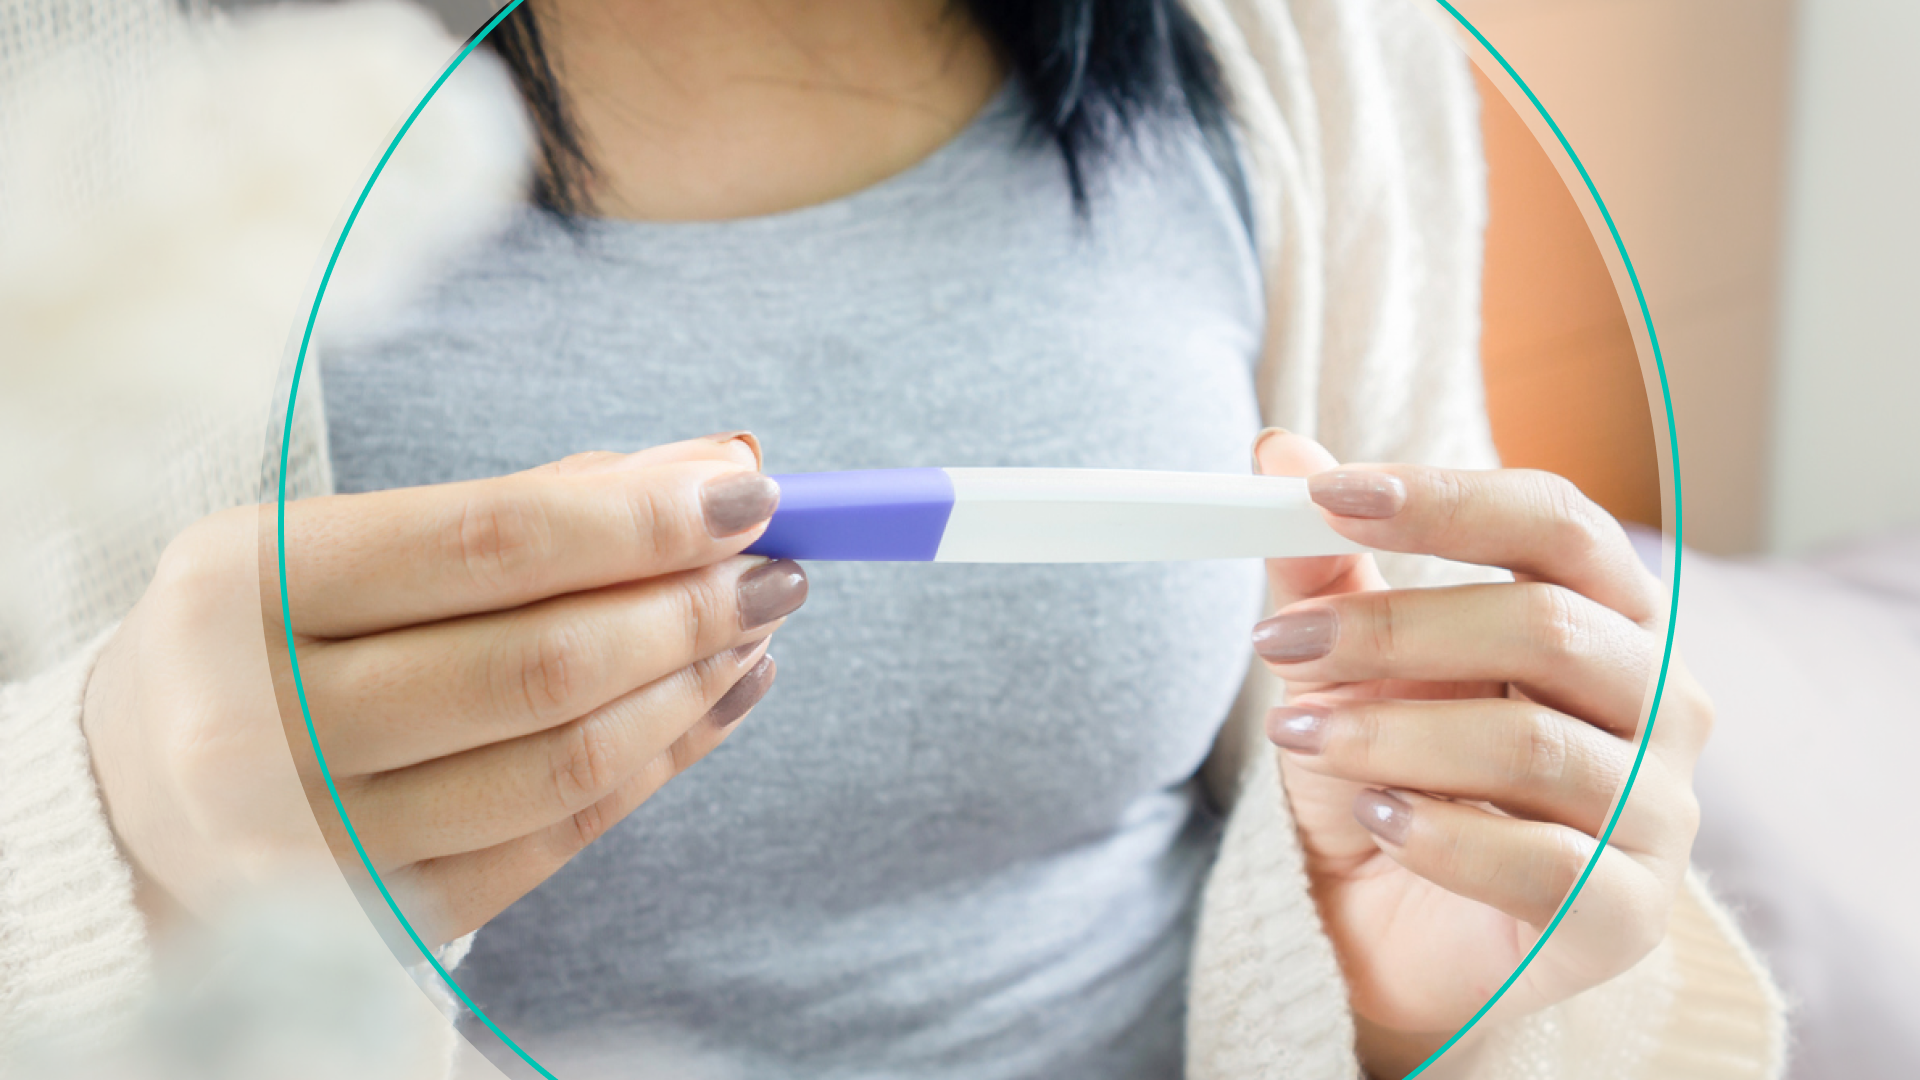 How Soon After Unprotected Sex Can I Test For Pregnancy? theSkimm